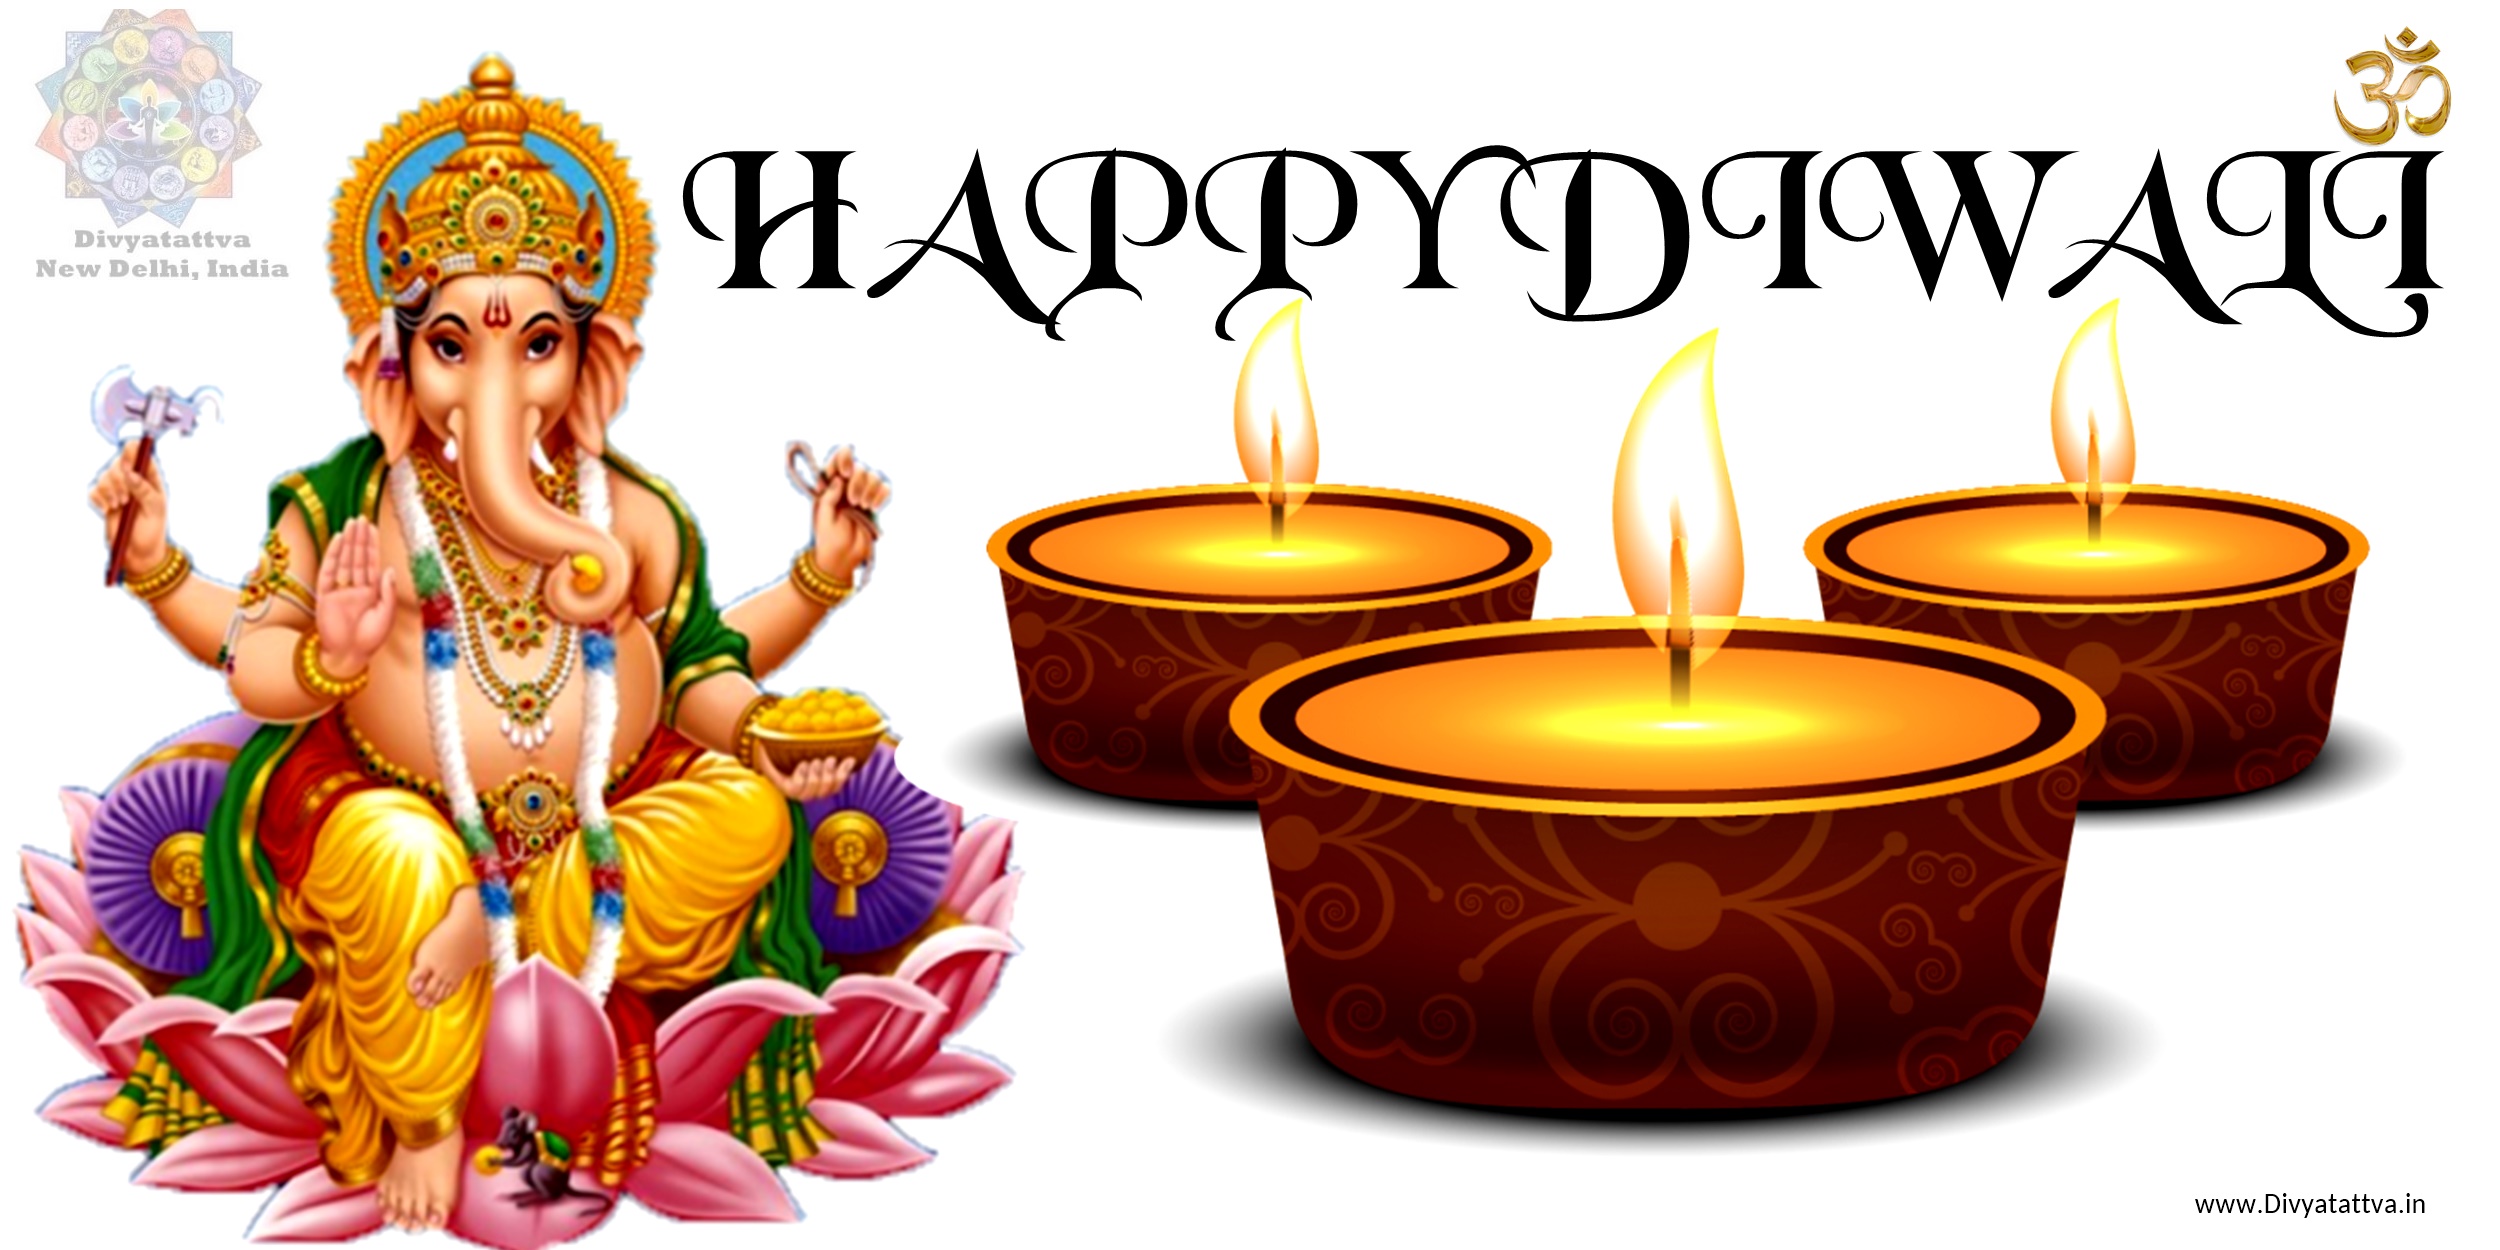 Diwali Greetings Background Images Wallpapers Messages & Wishes